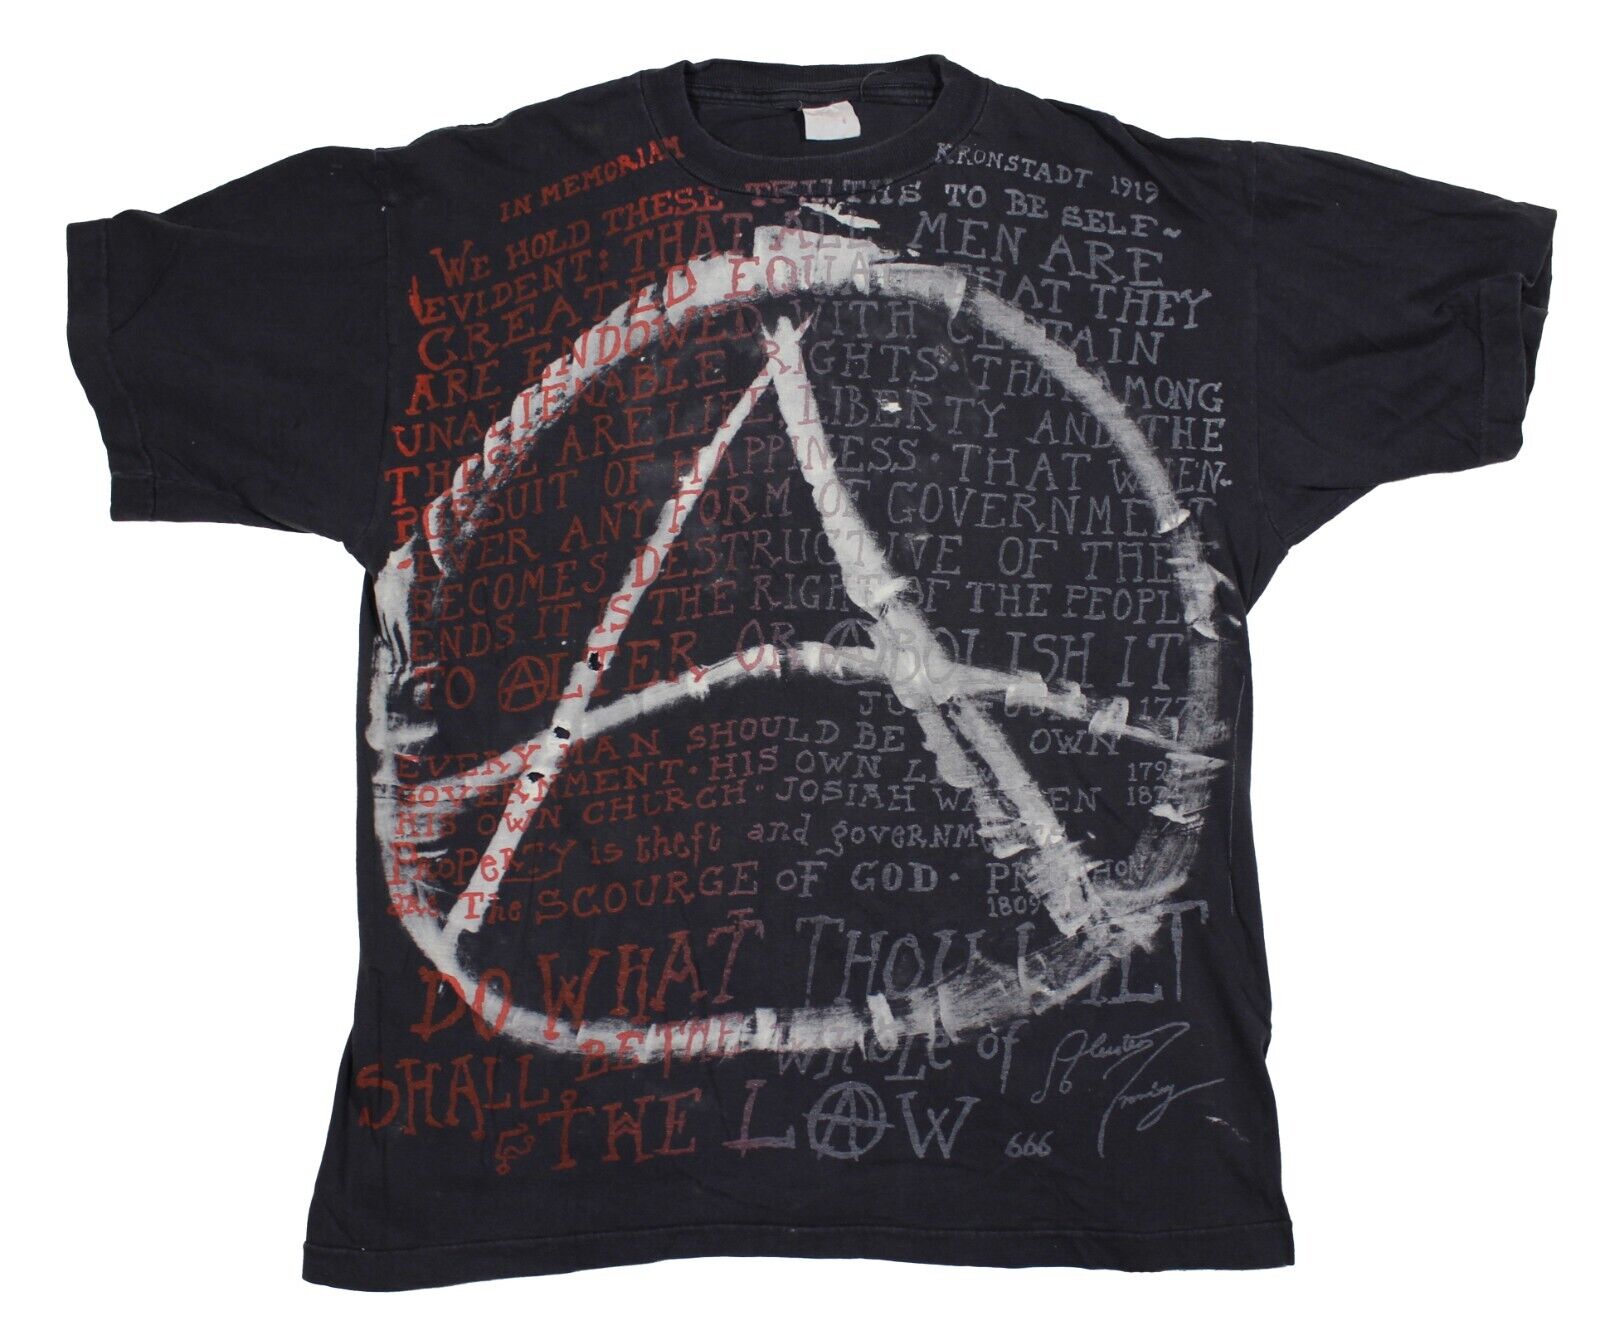 Anarchy – Rare Vintage T-shirt featuring several Anarchy quotes by 4 writers.